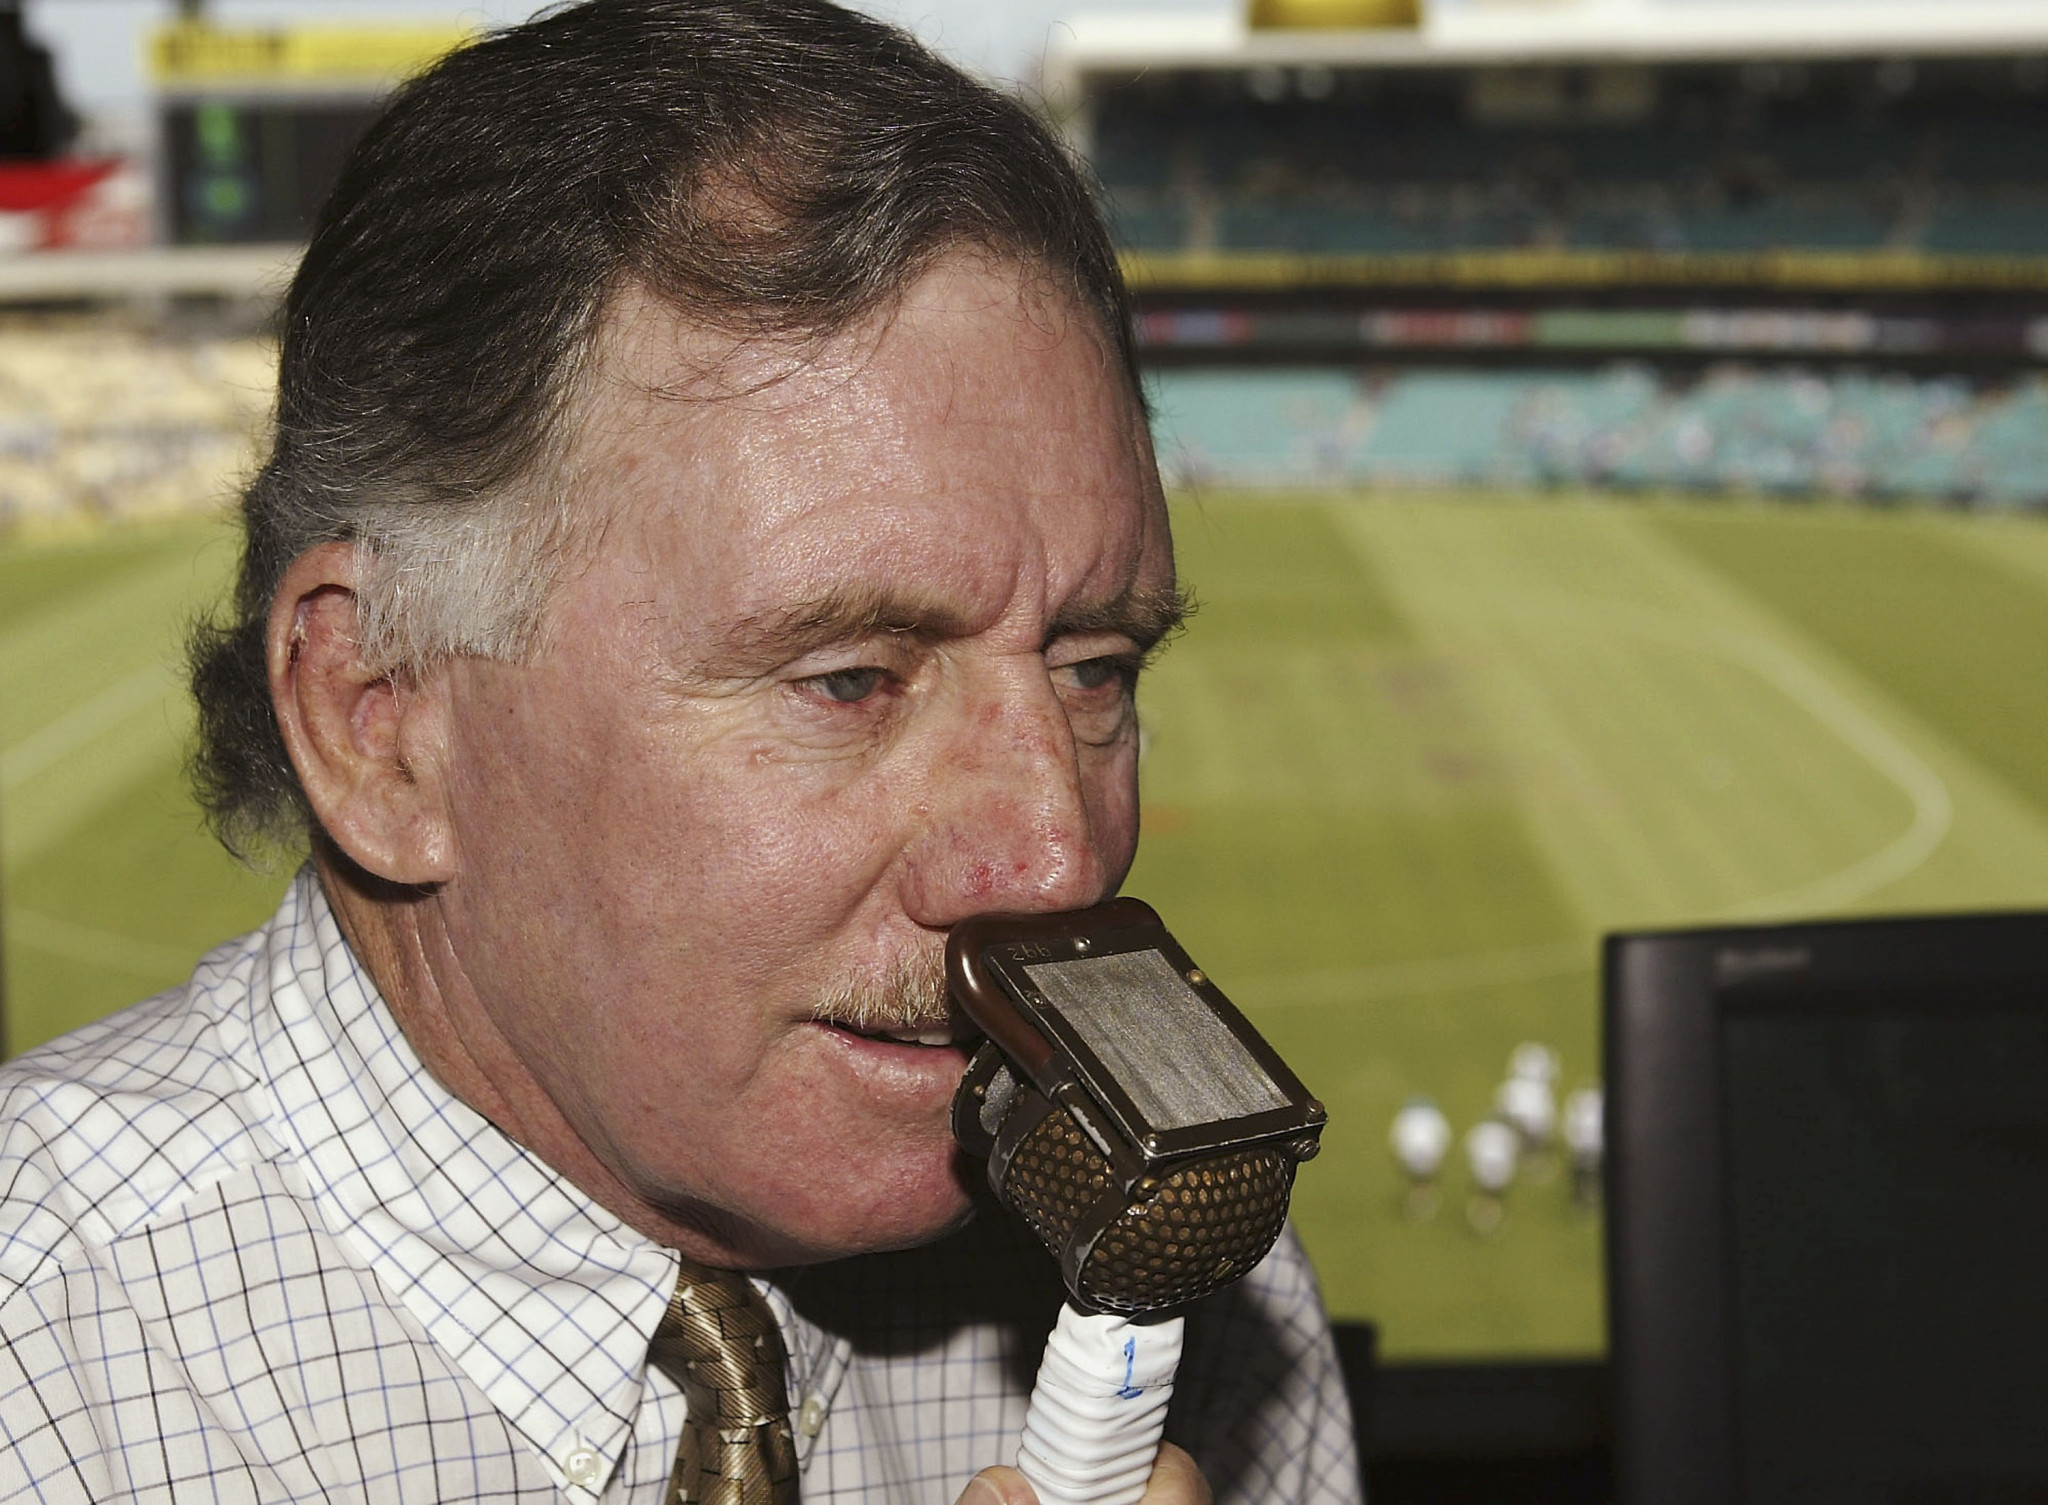 Australian cricket icon Chappell retires from commentary